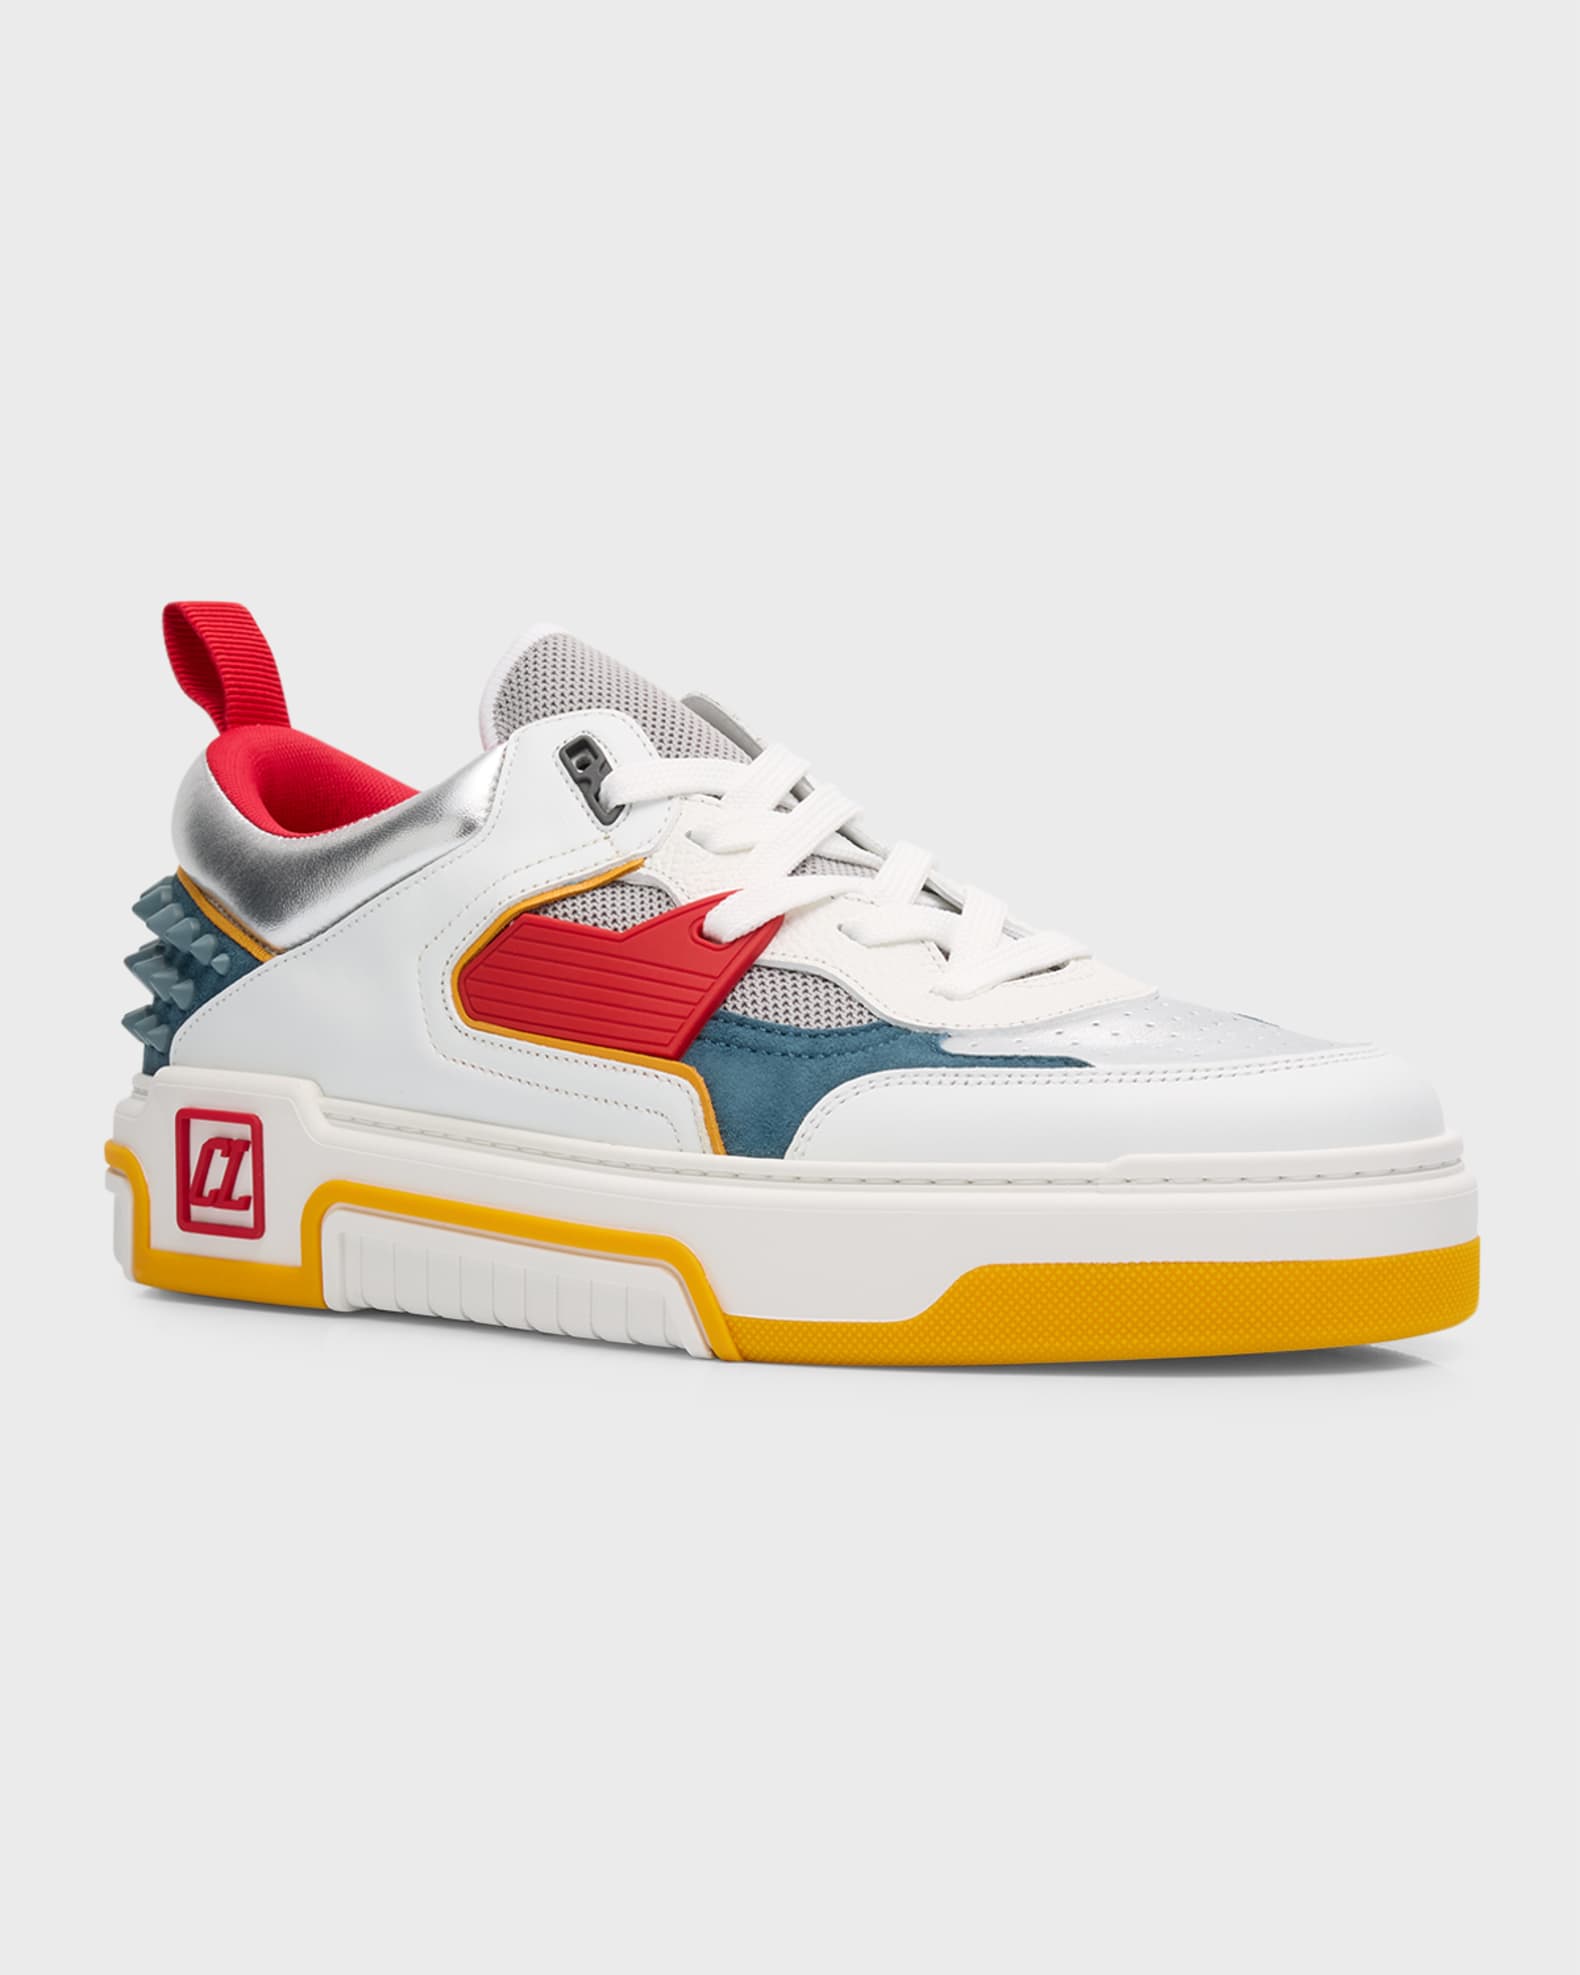 The article: Introducing the ASTROLOUBI: Christian Louboutin's new  must-have sneaker